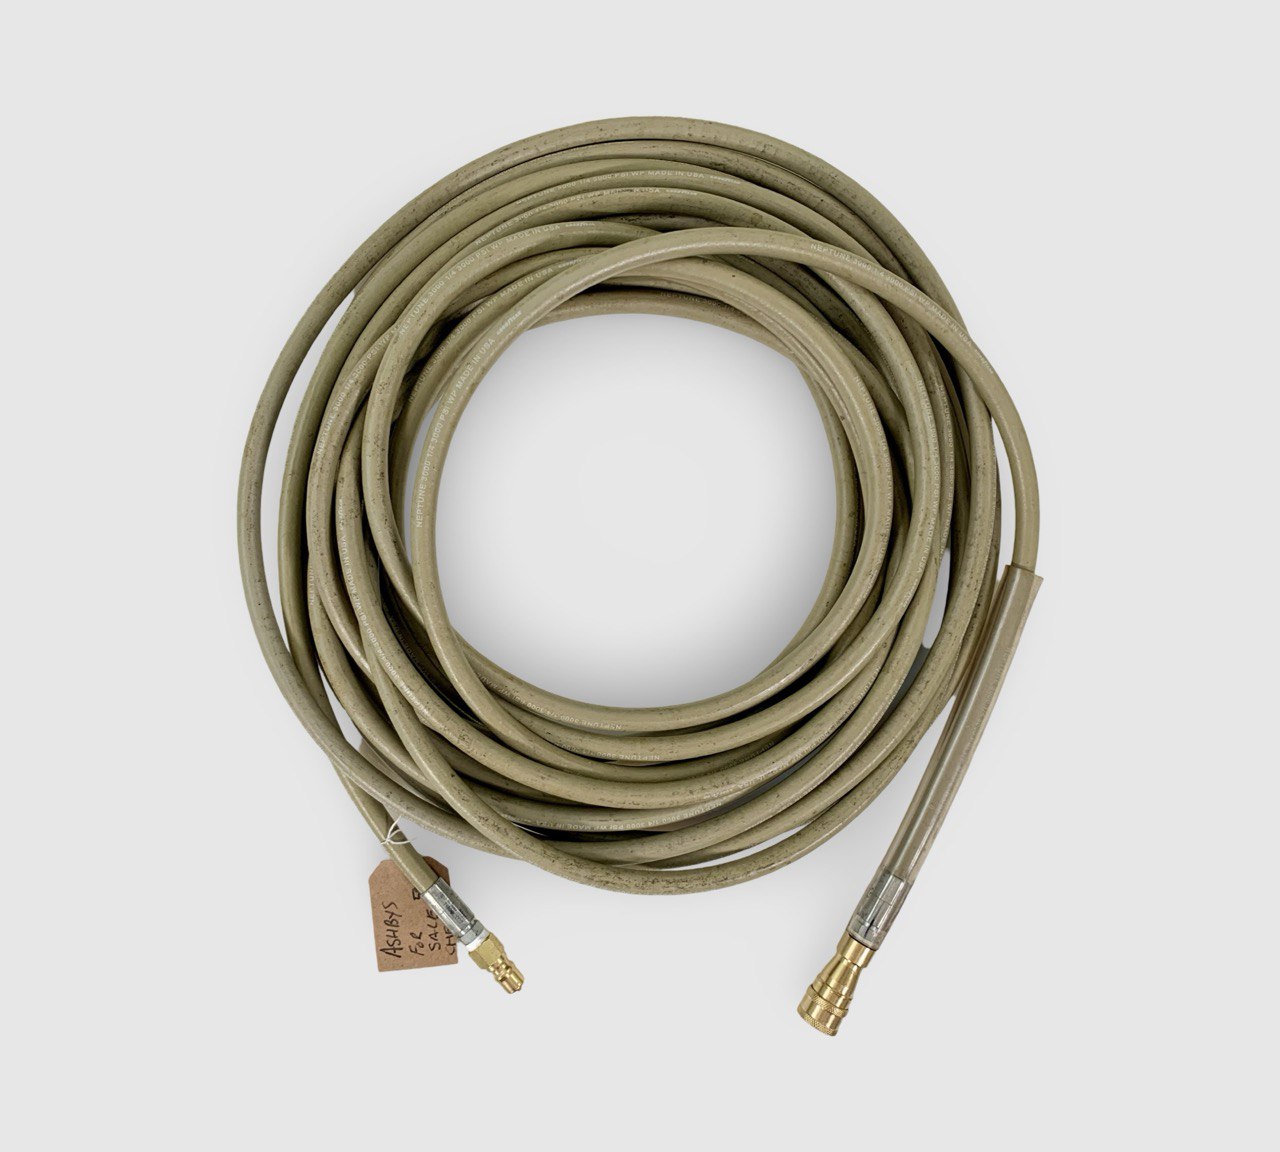 PRE-OWNED 50ft / 15.2m High Pressure Solution Hose ONLY - fitted with Standard Male & Female Connector